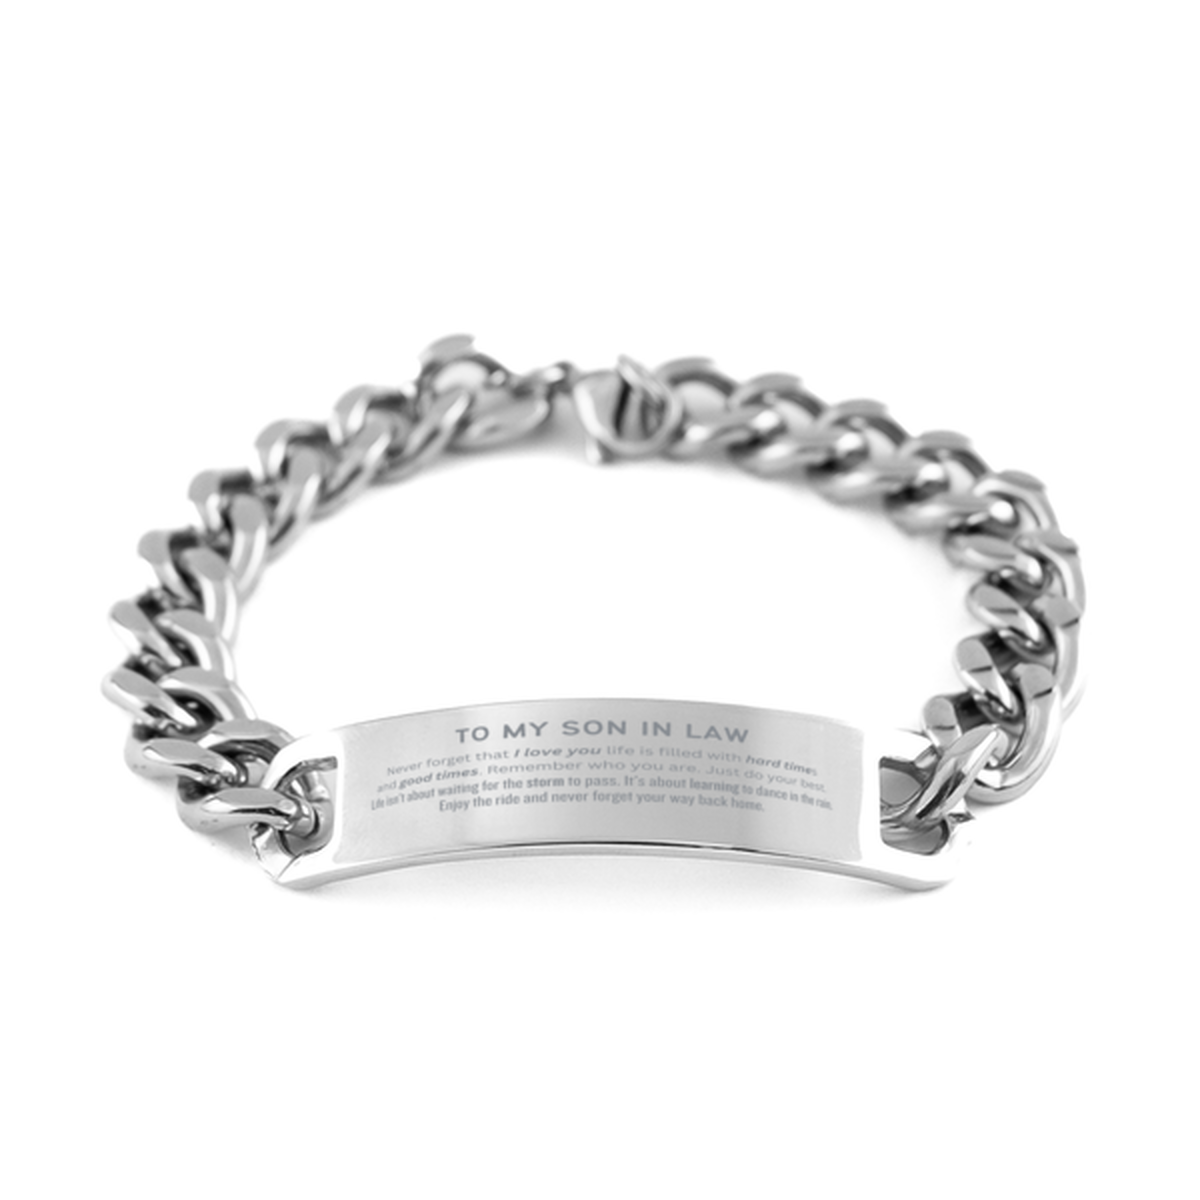 Christmas Son In Law Cuban Chain Stainless Steel Bracelet Gifts, To My Son In Law Birthday Thank You Gifts For Son In Law, Graduation Unique Gifts For Son In Law To My Son In Law Never forget that I love you life is filled with hard times and good times.